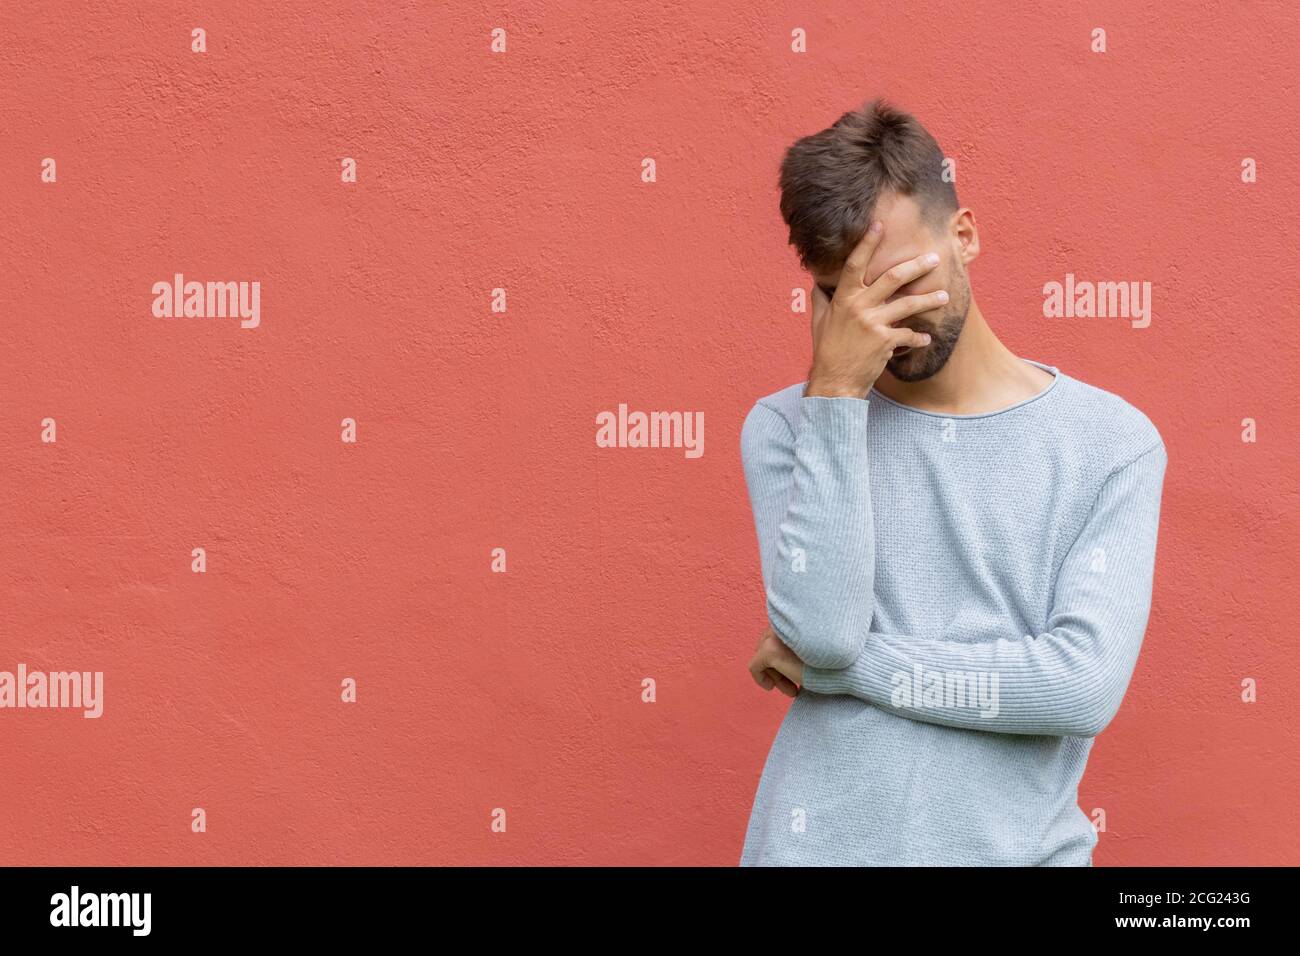 Facepalm. Ashamed embarrassed man covering his face. Young guy on red wall background with copy space. Emotion facial expression and feelings concept Stock Photo